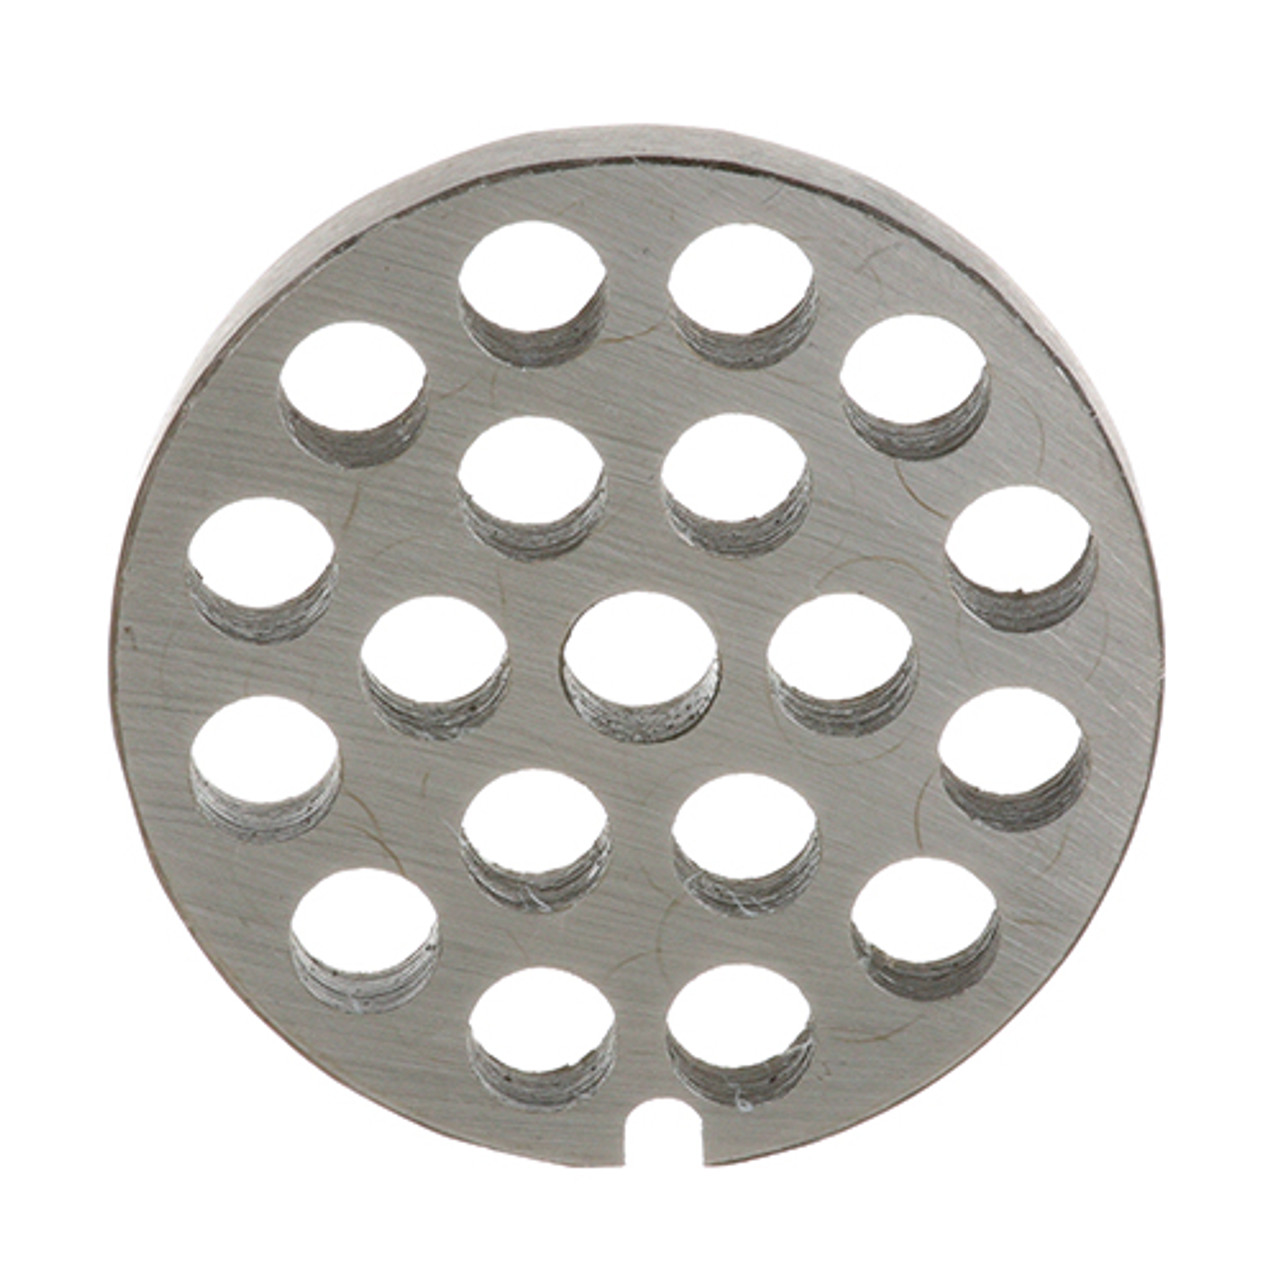 Grinder Plate - 3/8" - Replacement Part For Blakeslee 01905